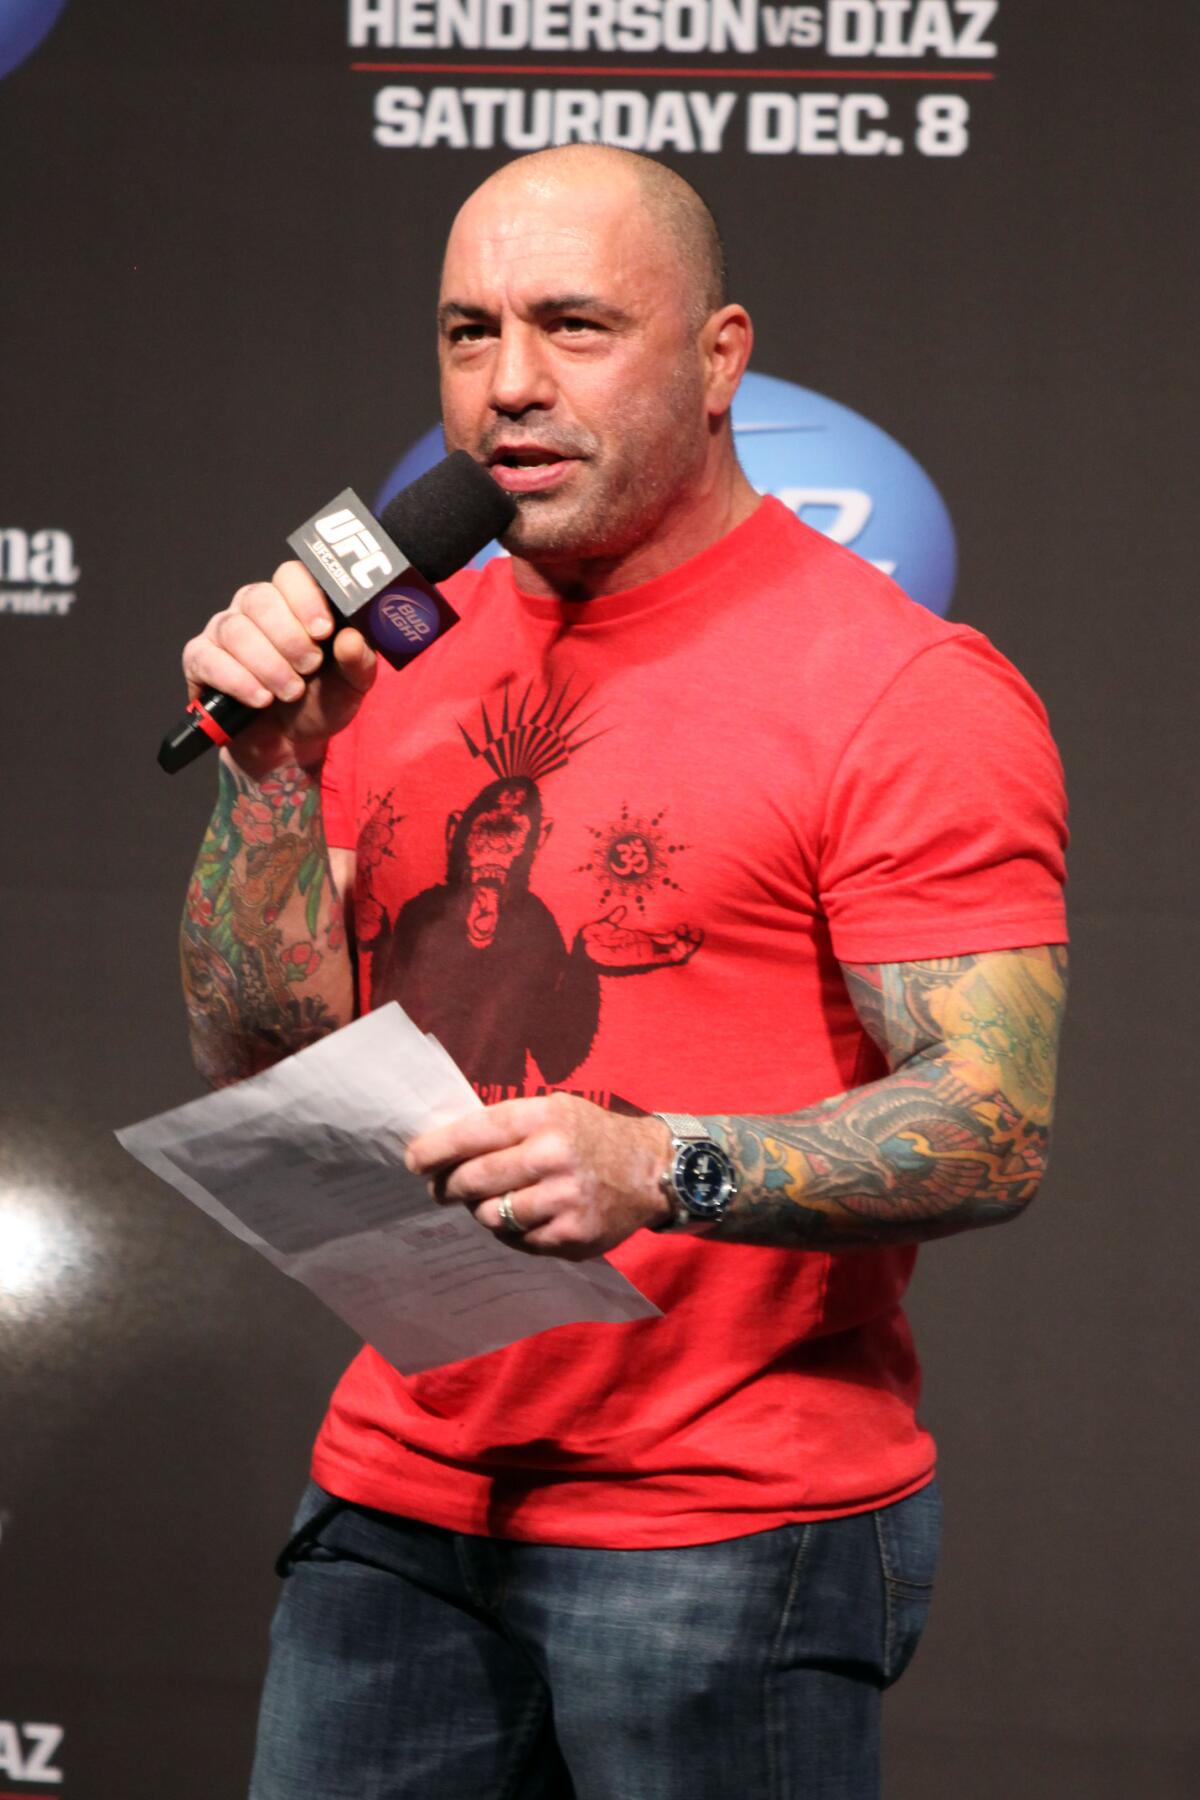 A bald man with a red T-shirt and arm tattoos speaks into a microphone